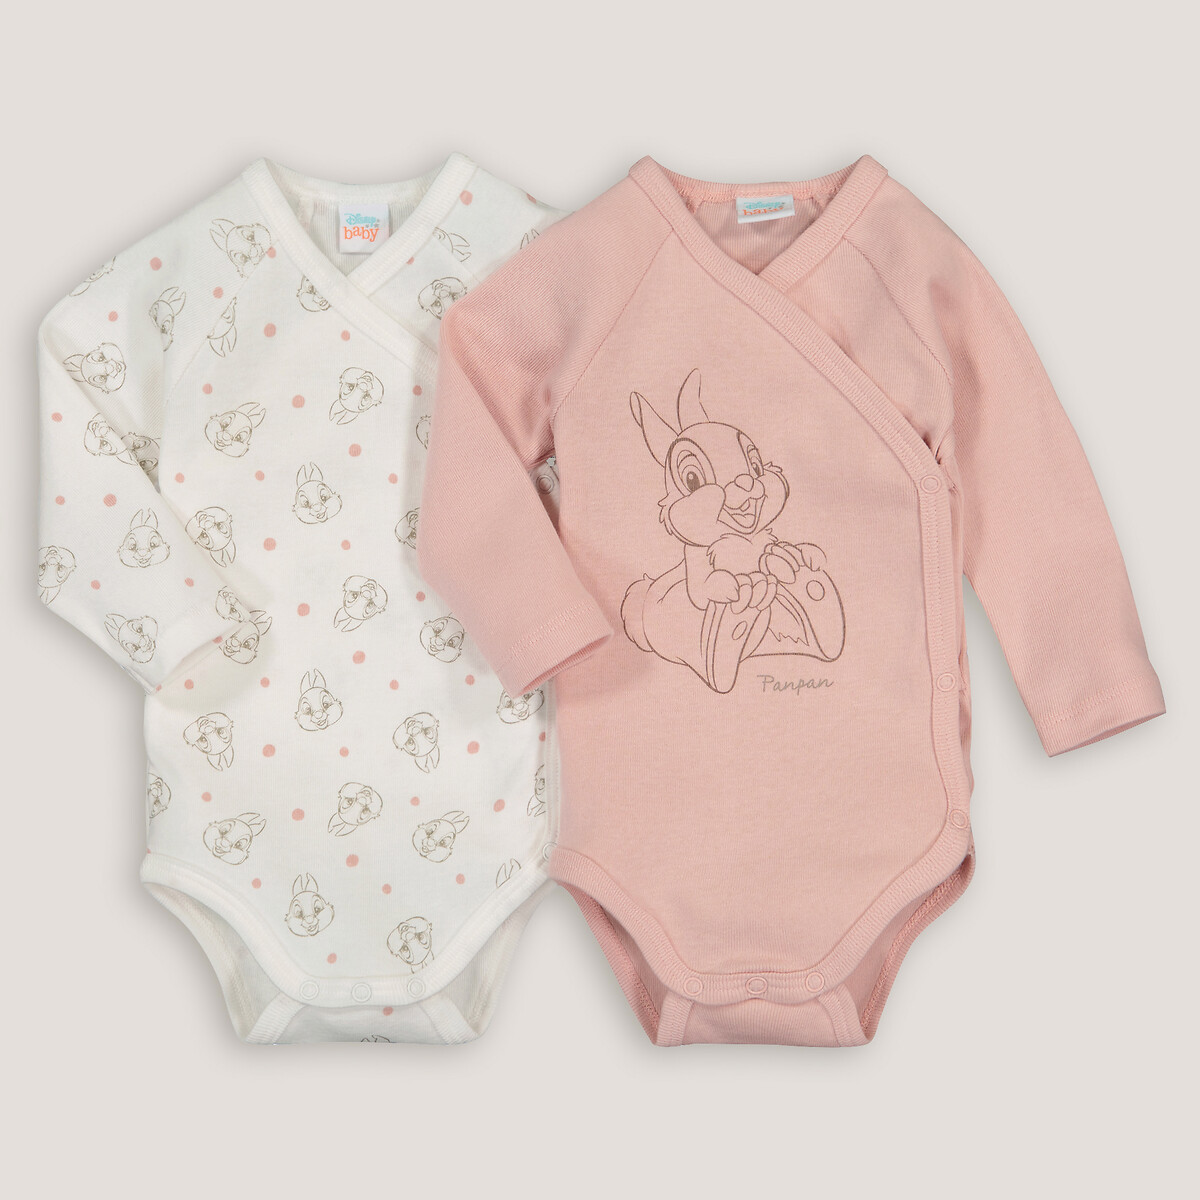 Pack of 2 Thumper Bodysuits in Organic Cotton with Long Sleeves